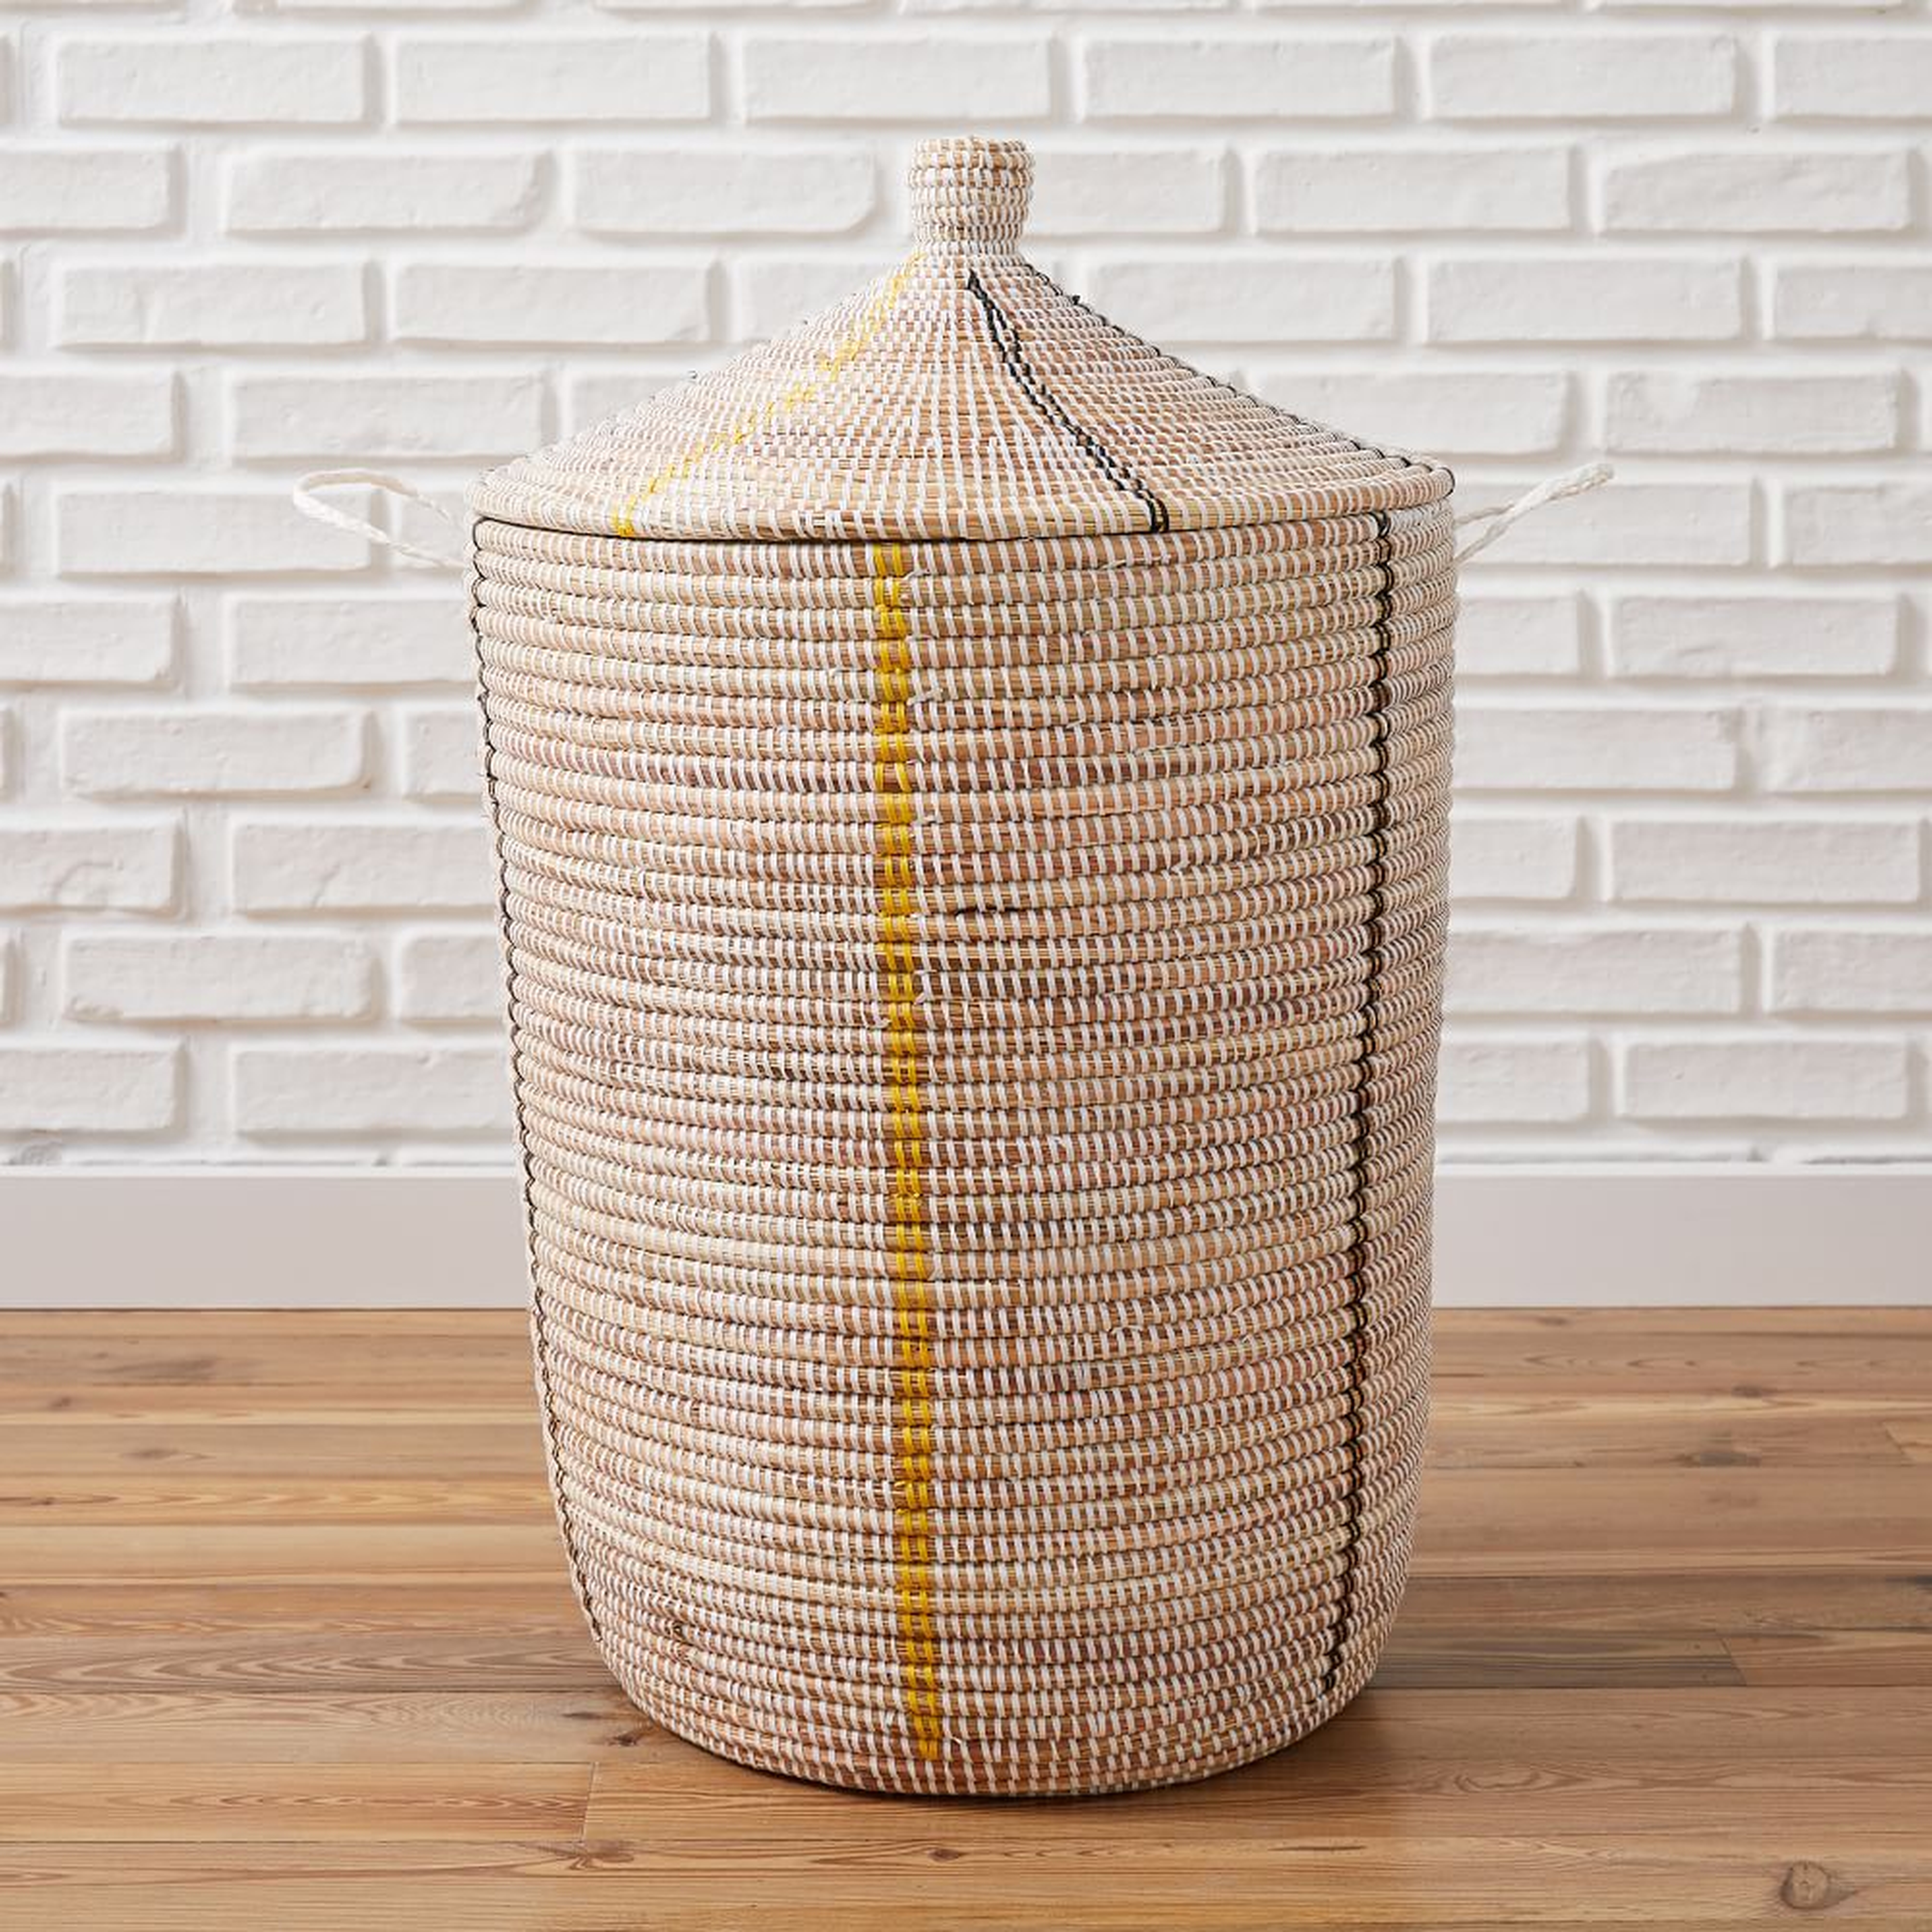 Mbare Graphic Basket, White, Large - West Elm